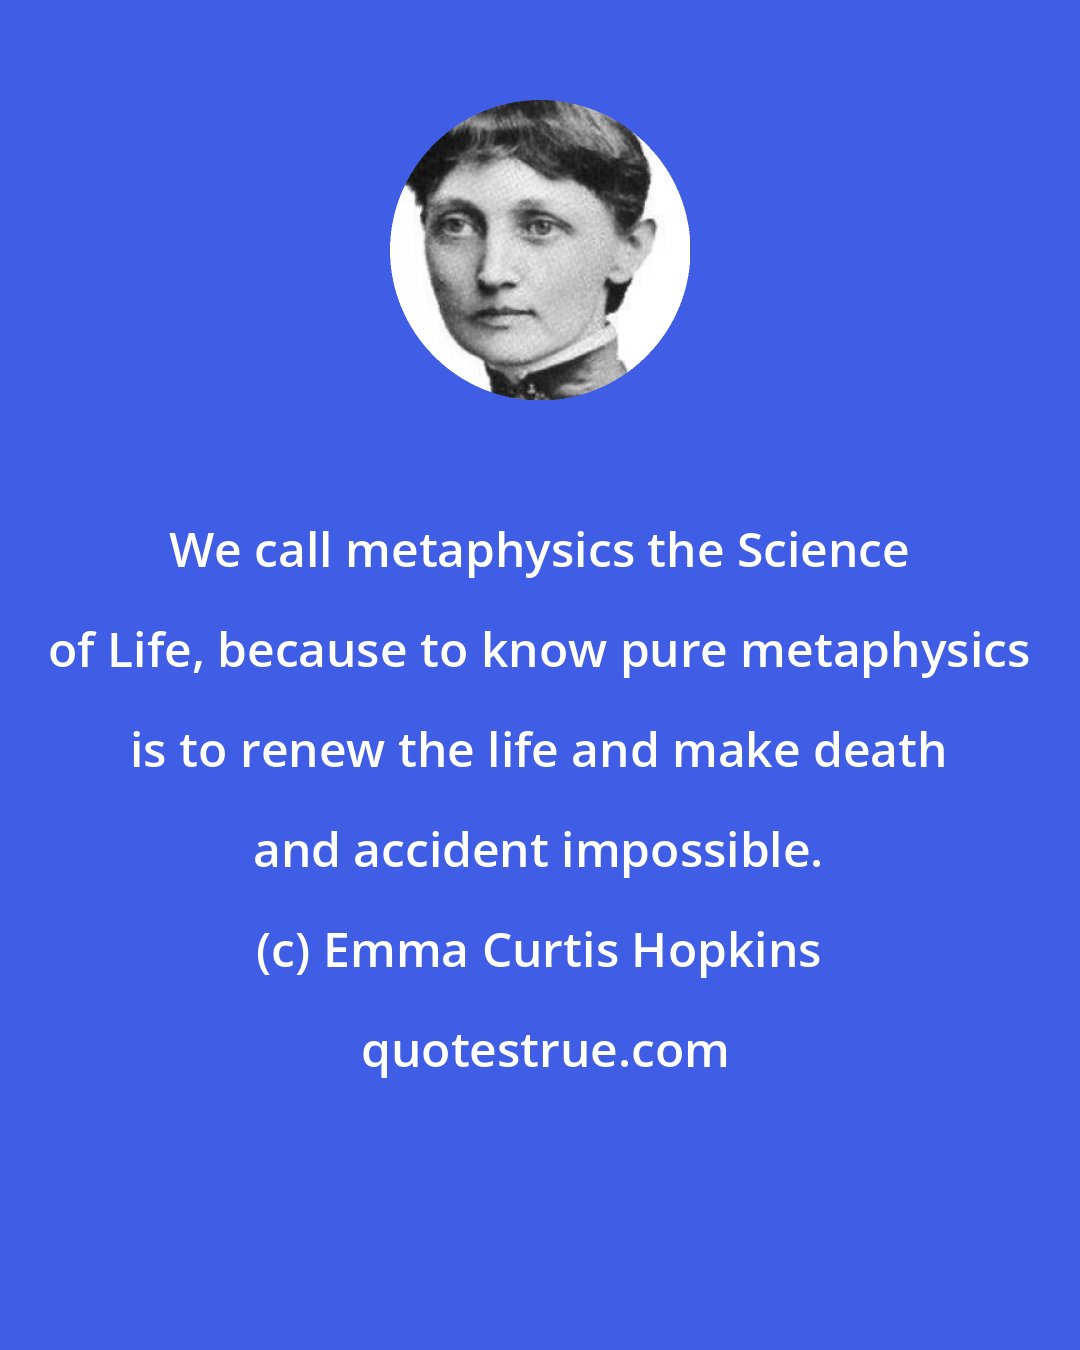 Emma Curtis Hopkins: We call metaphysics the Science of Life, because to know pure metaphysics is to renew the life and make death and accident impossible.